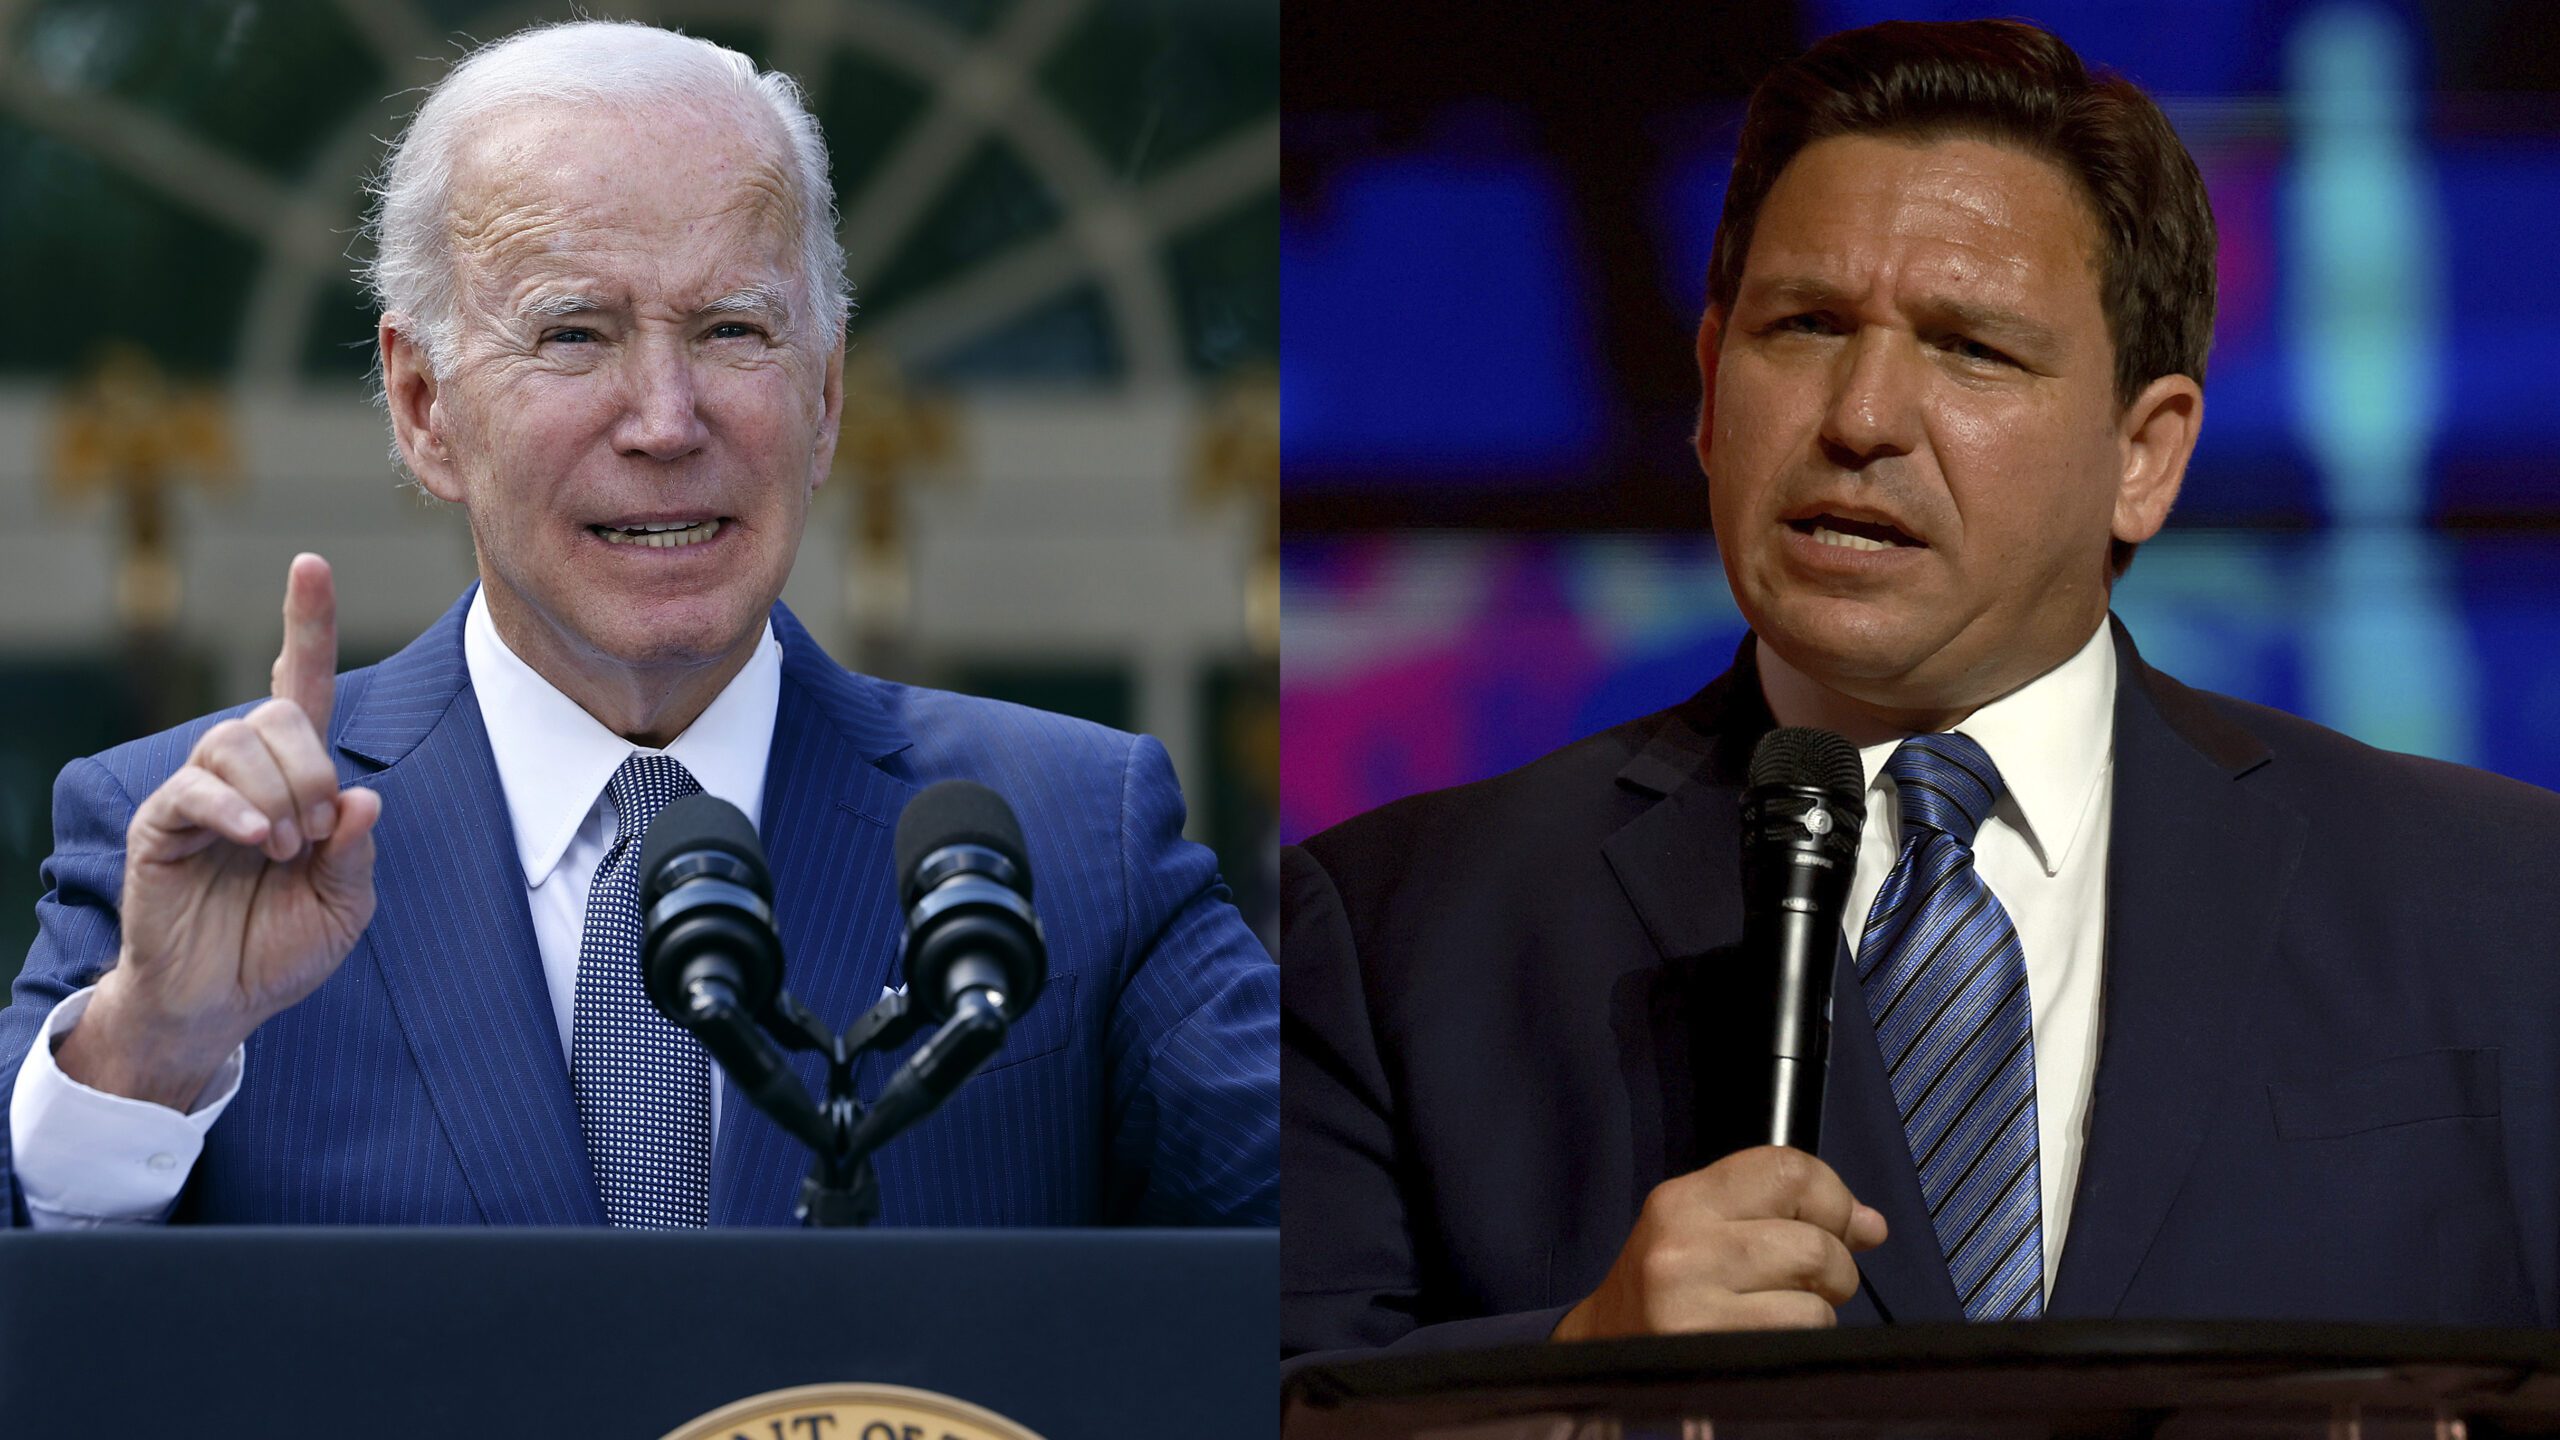 biden-finally-speaks-to-desantis-following-backlash-over-not-reaching-out-ahead-of-hurricane